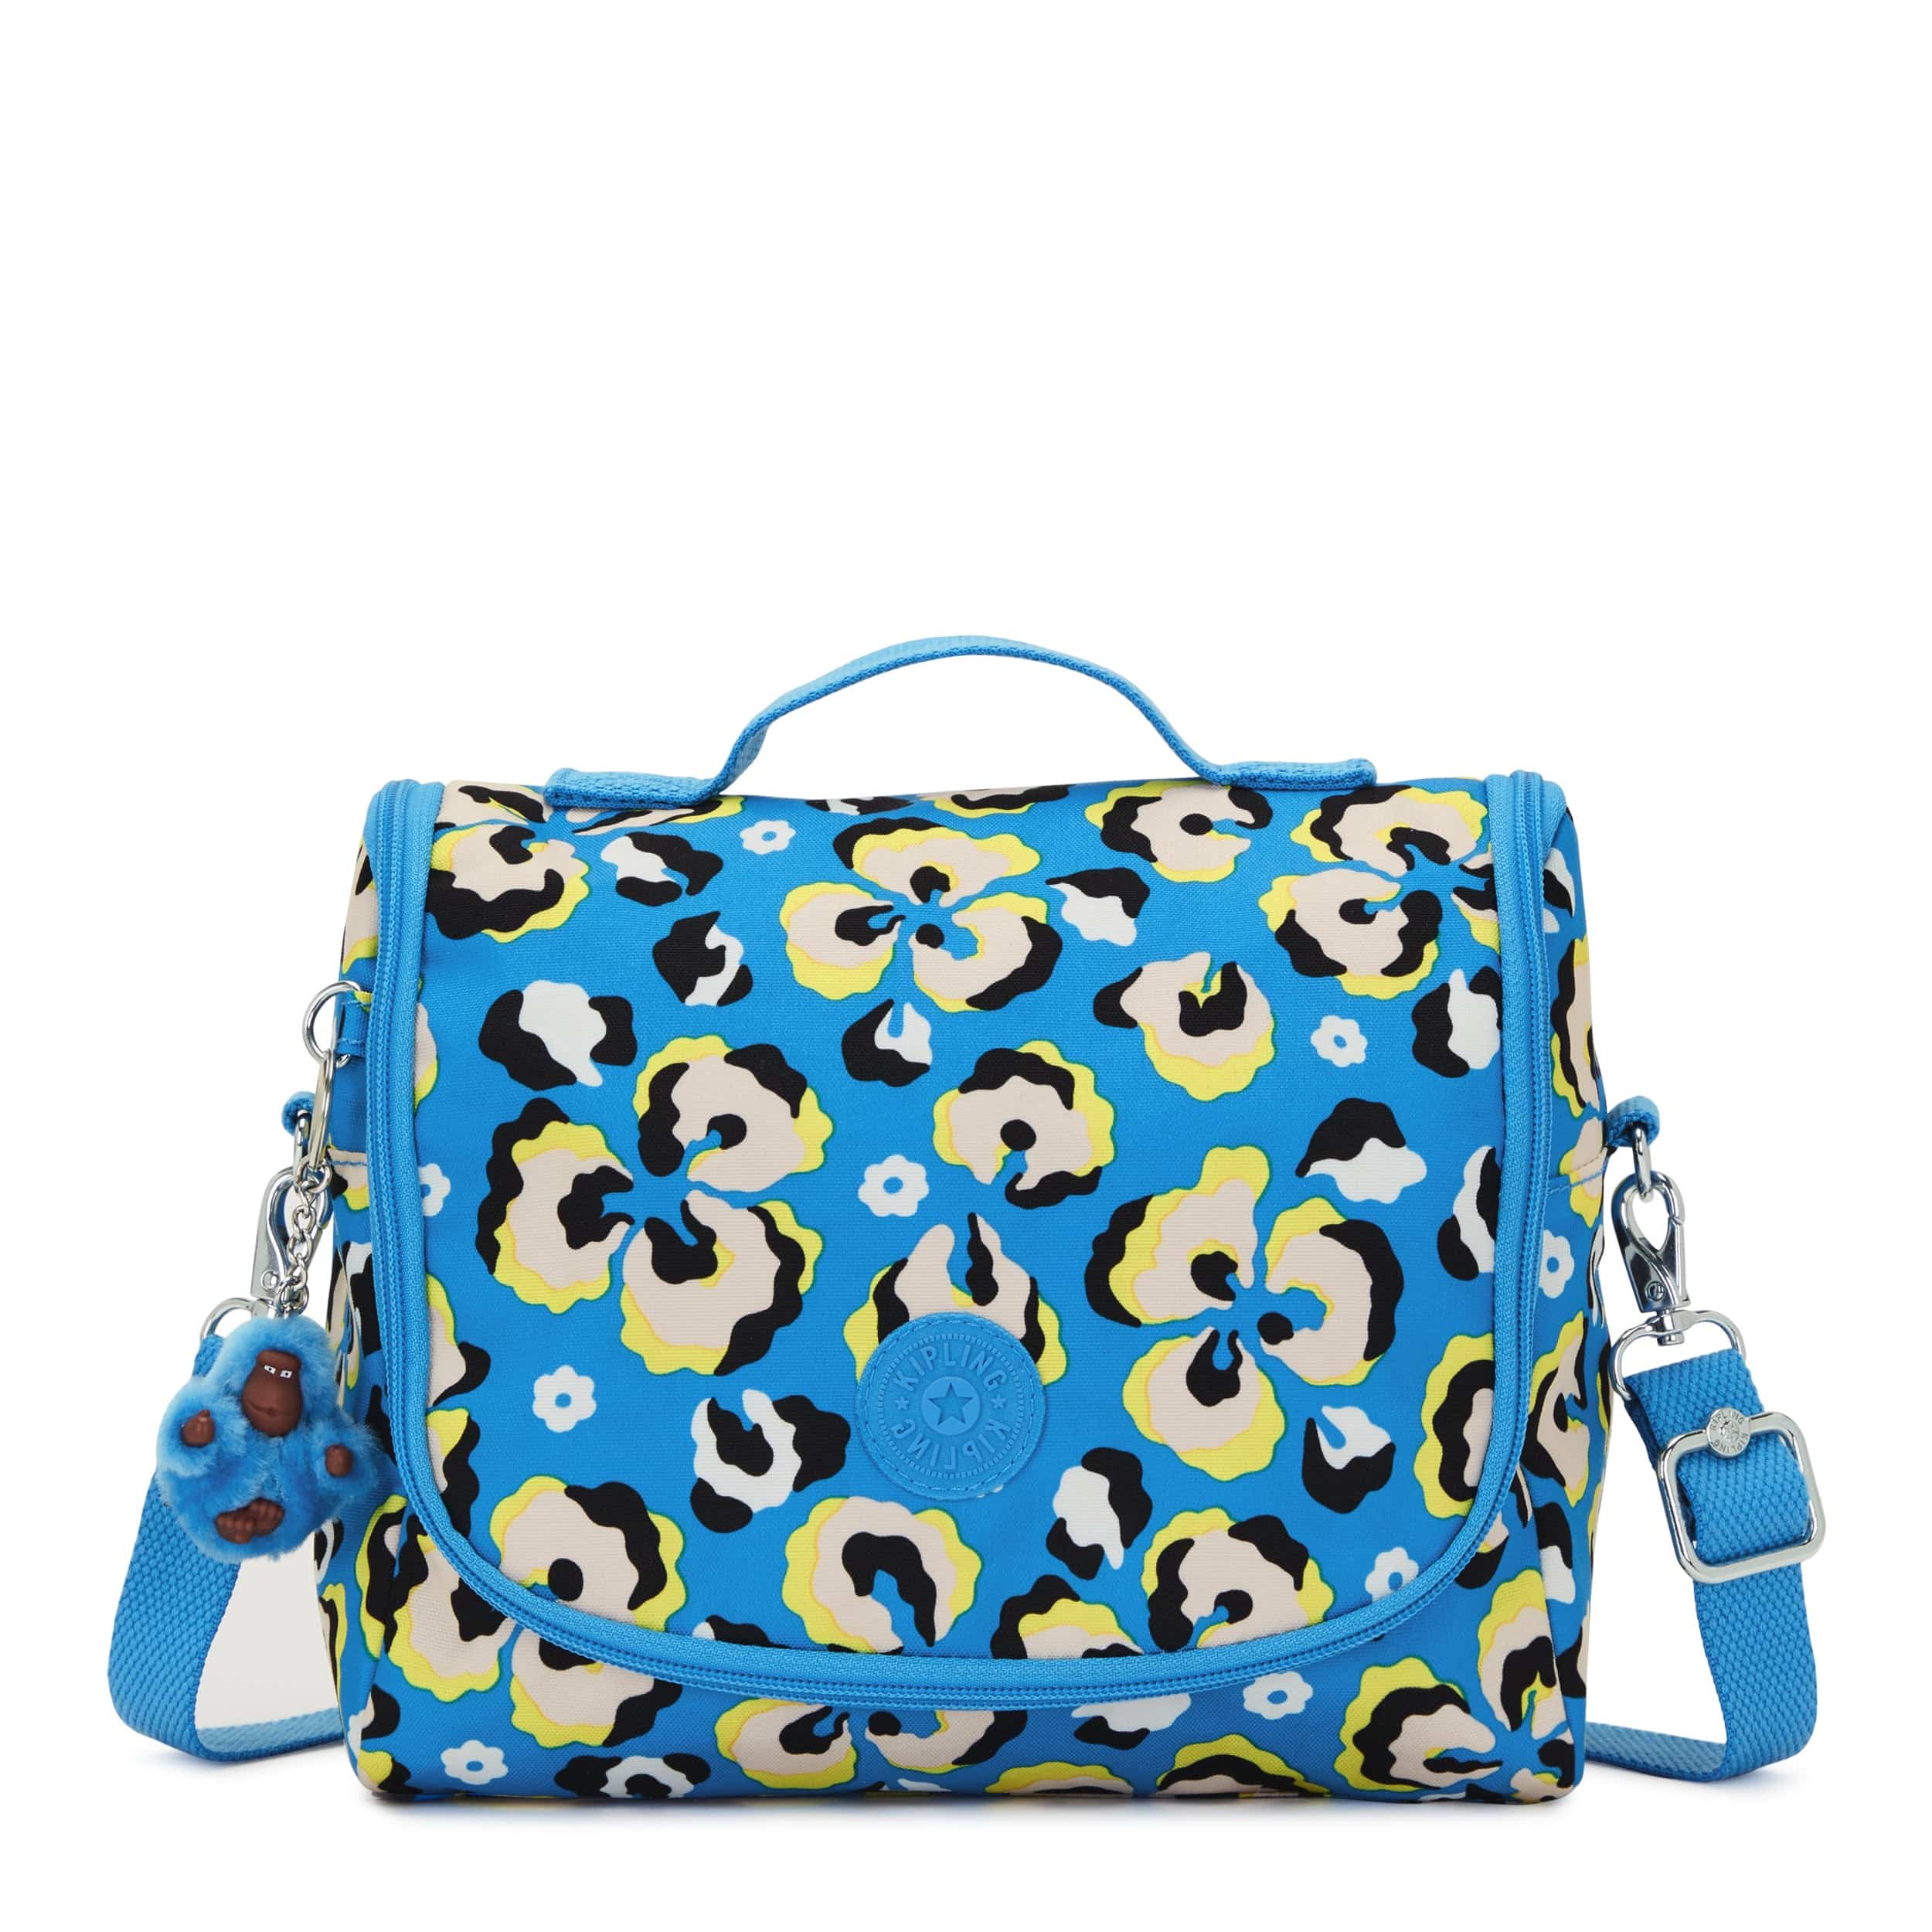 KIPLING-New Kichirou-Large Lunchbox (With Trolley Sleeve)-Leopard Floral-I5749-P2A